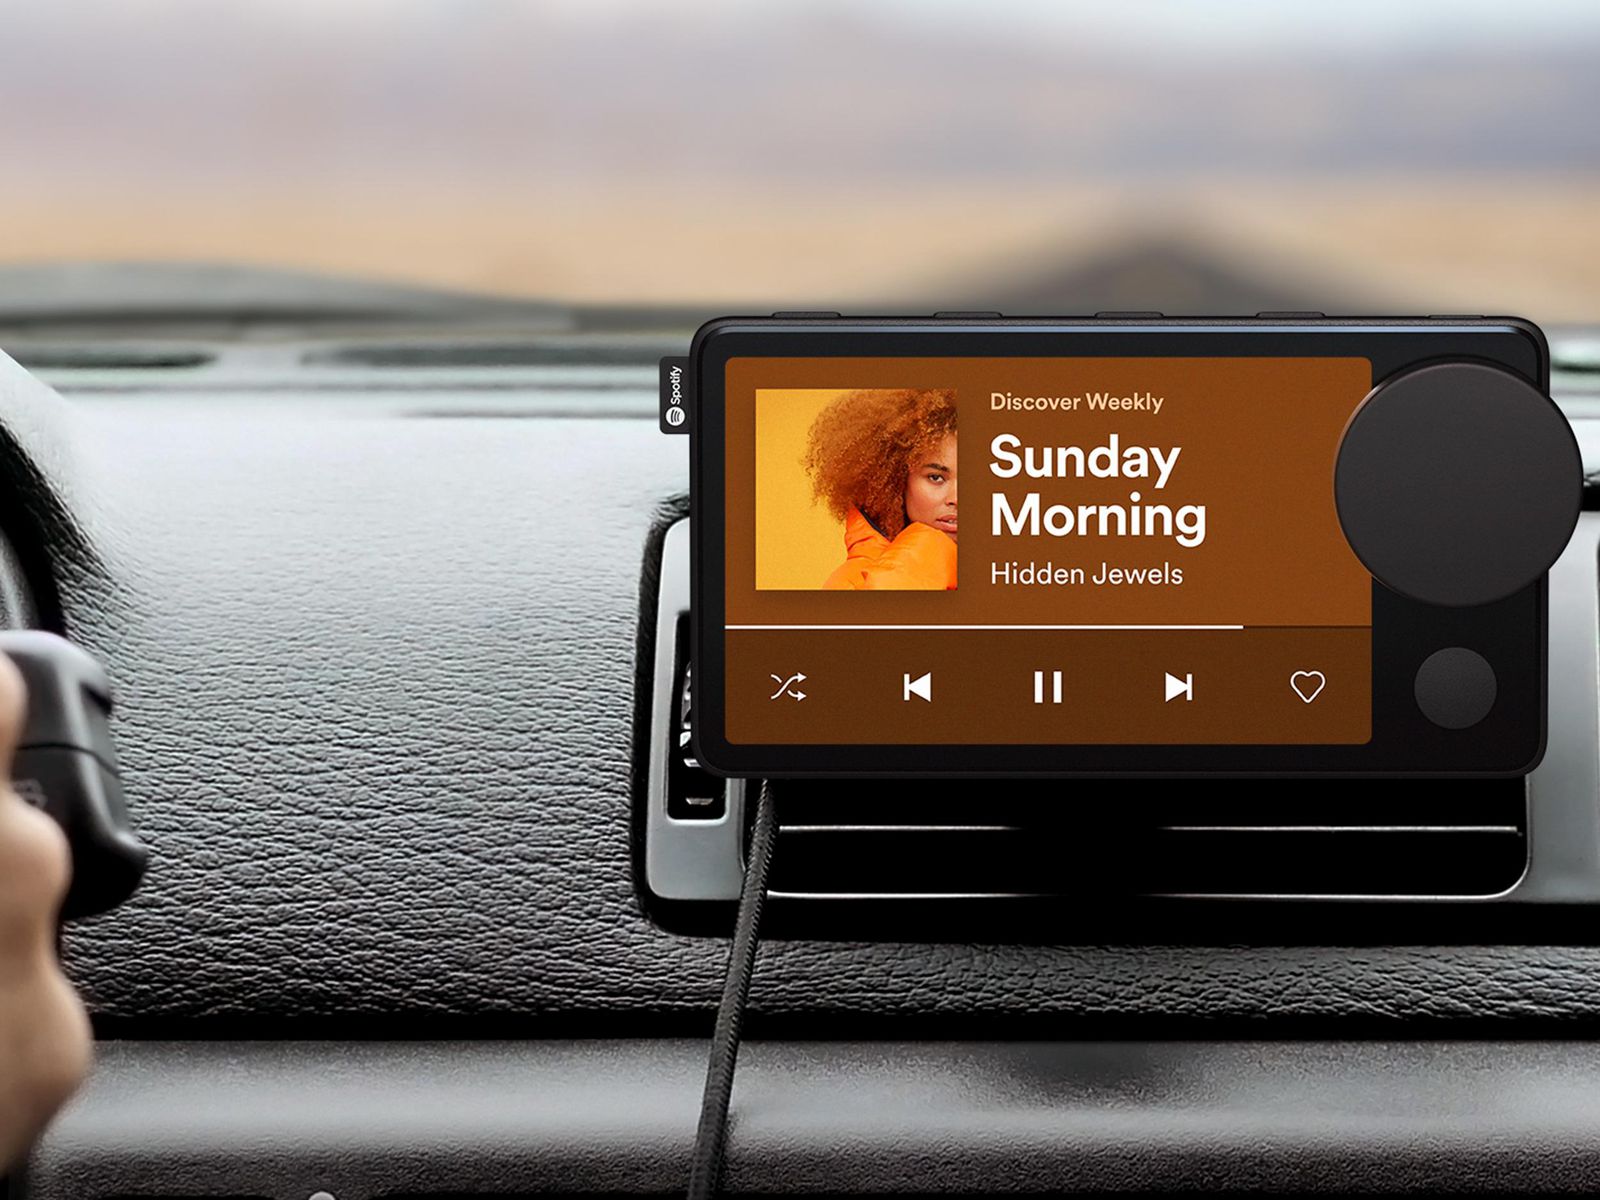 Spotify Announces the 'Car Thing' as its First Hardware Device - MacRumors